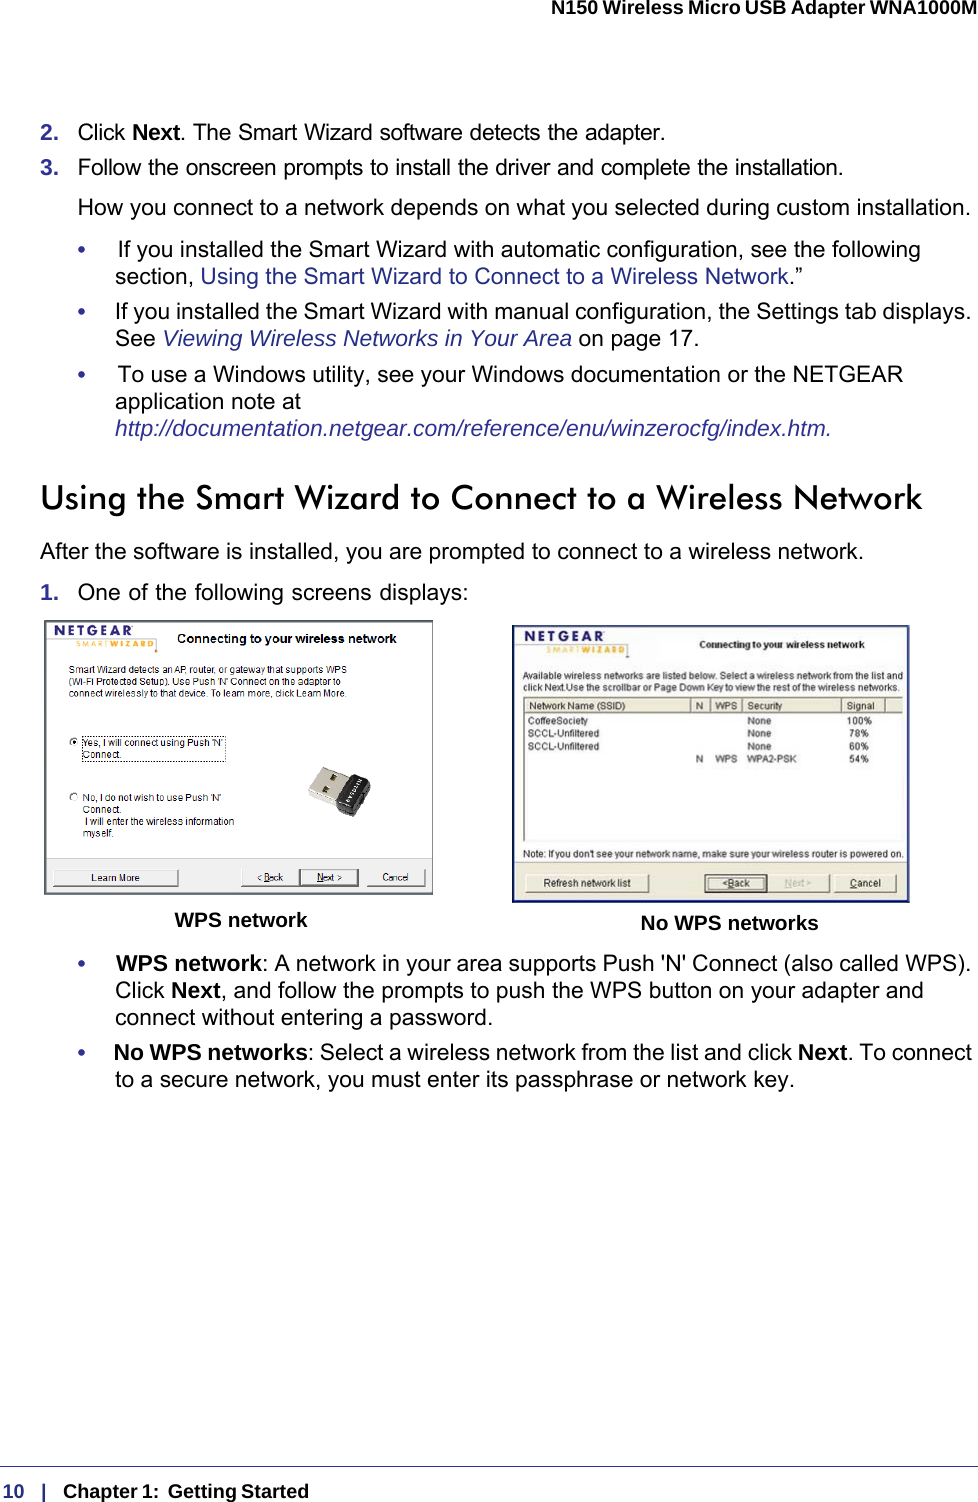 10   |   Chapter 1:  Getting Started  N150 Wireless Micro USB Adapter WNA1000M 2.  Click Next. The Smart Wizard software detects the adapter. 3.  Follow the onscreen prompts to install the driver and complete the installation.How you connect to a network depends on what you selected during custom installation. •     If you installed the Smart Wizard with automatic configuration, see the following section, Using the Smart Wizard to Connect to a Wireless Network.”•     If you installed the Smart Wizard with manual configuration, the Settings tab displays. See Viewing Wireless Networks in Your Area on page  17.•     To use a Windows utility, see your Windows documentation or the NETGEAR application note at http://documentation.netgear.com/reference/enu/winzerocfg/index.htm.Using the Smart Wizard to Connect to a Wireless NetworkAfter the software is installed, you are prompted to connect to a wireless network.1.  One of the following screens displays:WPS network No WPS networks•     WPS network: A network in your area supports Push &apos;N&apos; Connect (also called WPS). Click Next, and follow the prompts to push the WPS button on your adapter and connect without entering a password.•     No WPS networks: Select a wireless network from the list and click Next. To connect to a secure network, you must enter its passphrase or network key. 